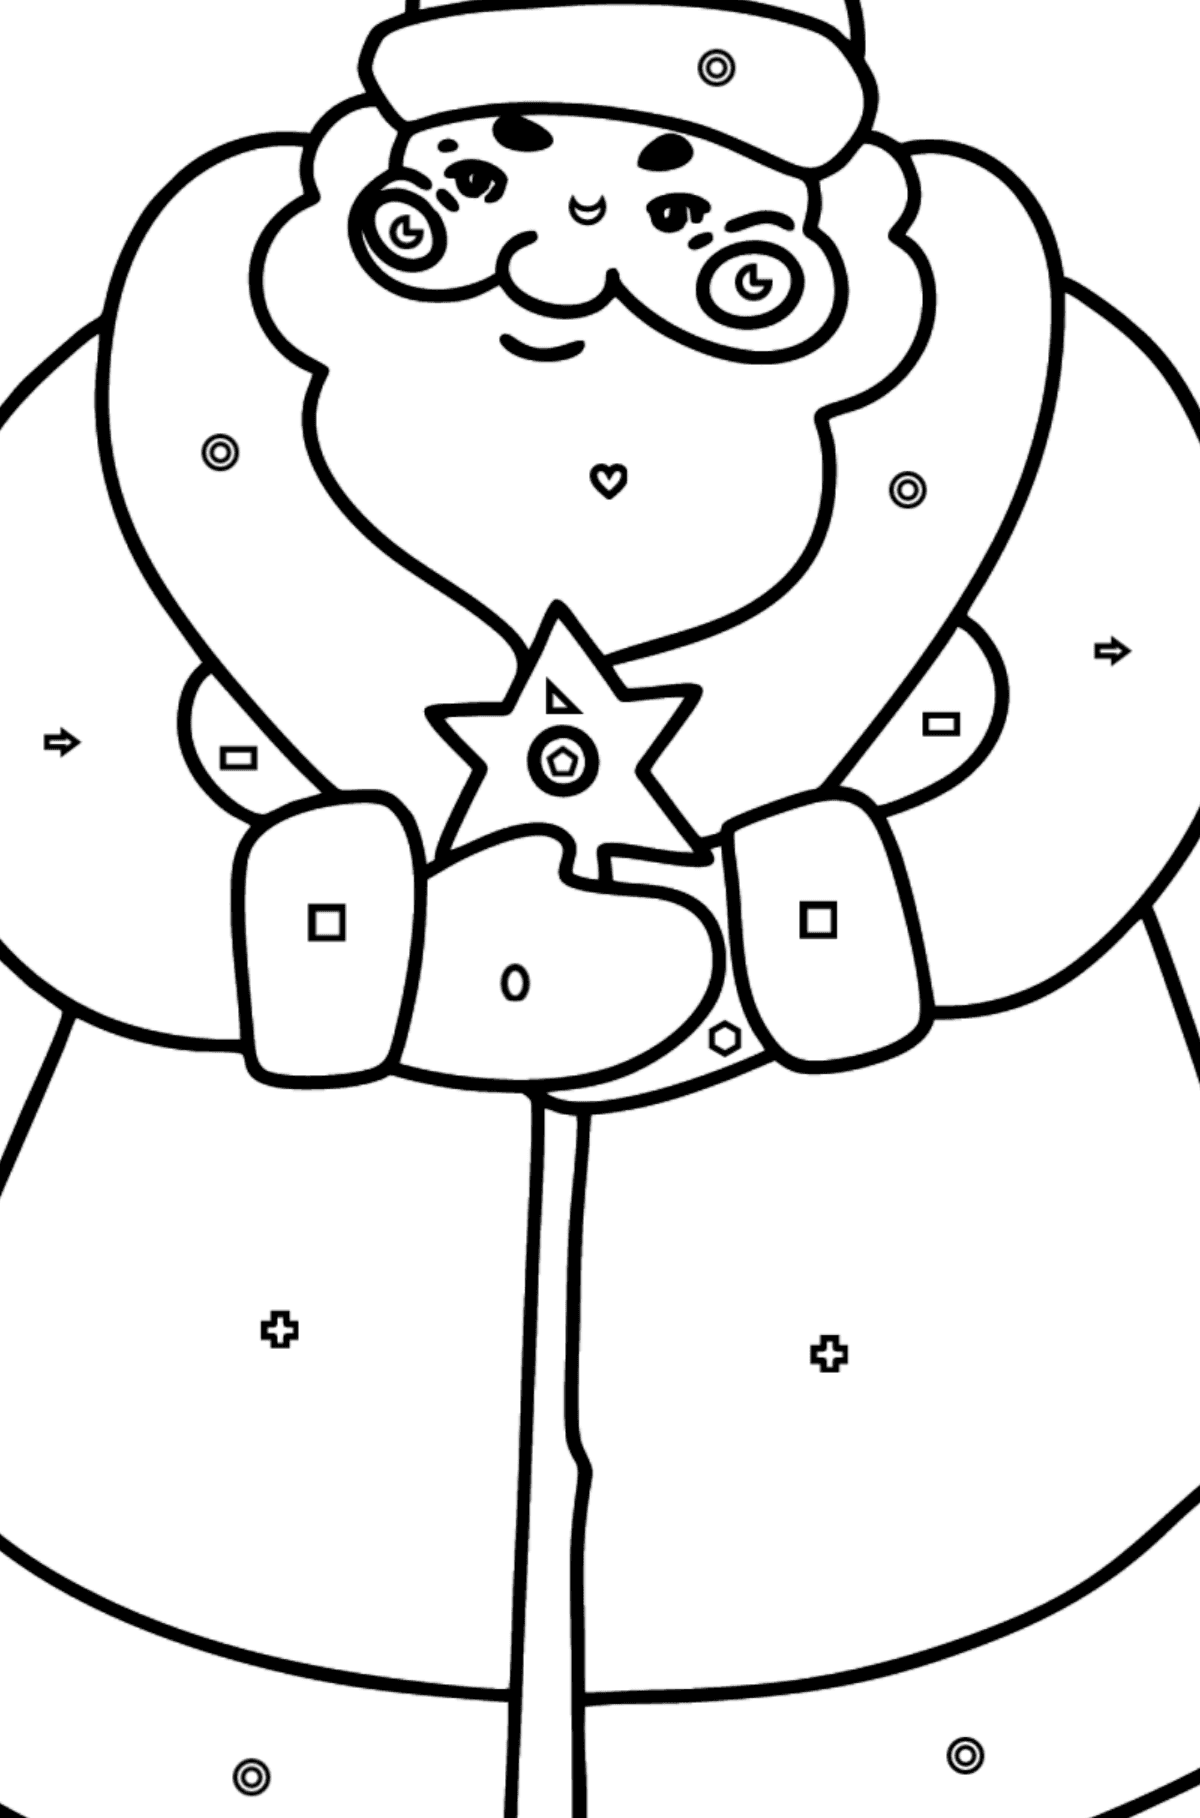 Good Father Frost coloring page - Coloring by Geometric Shapes for Kids